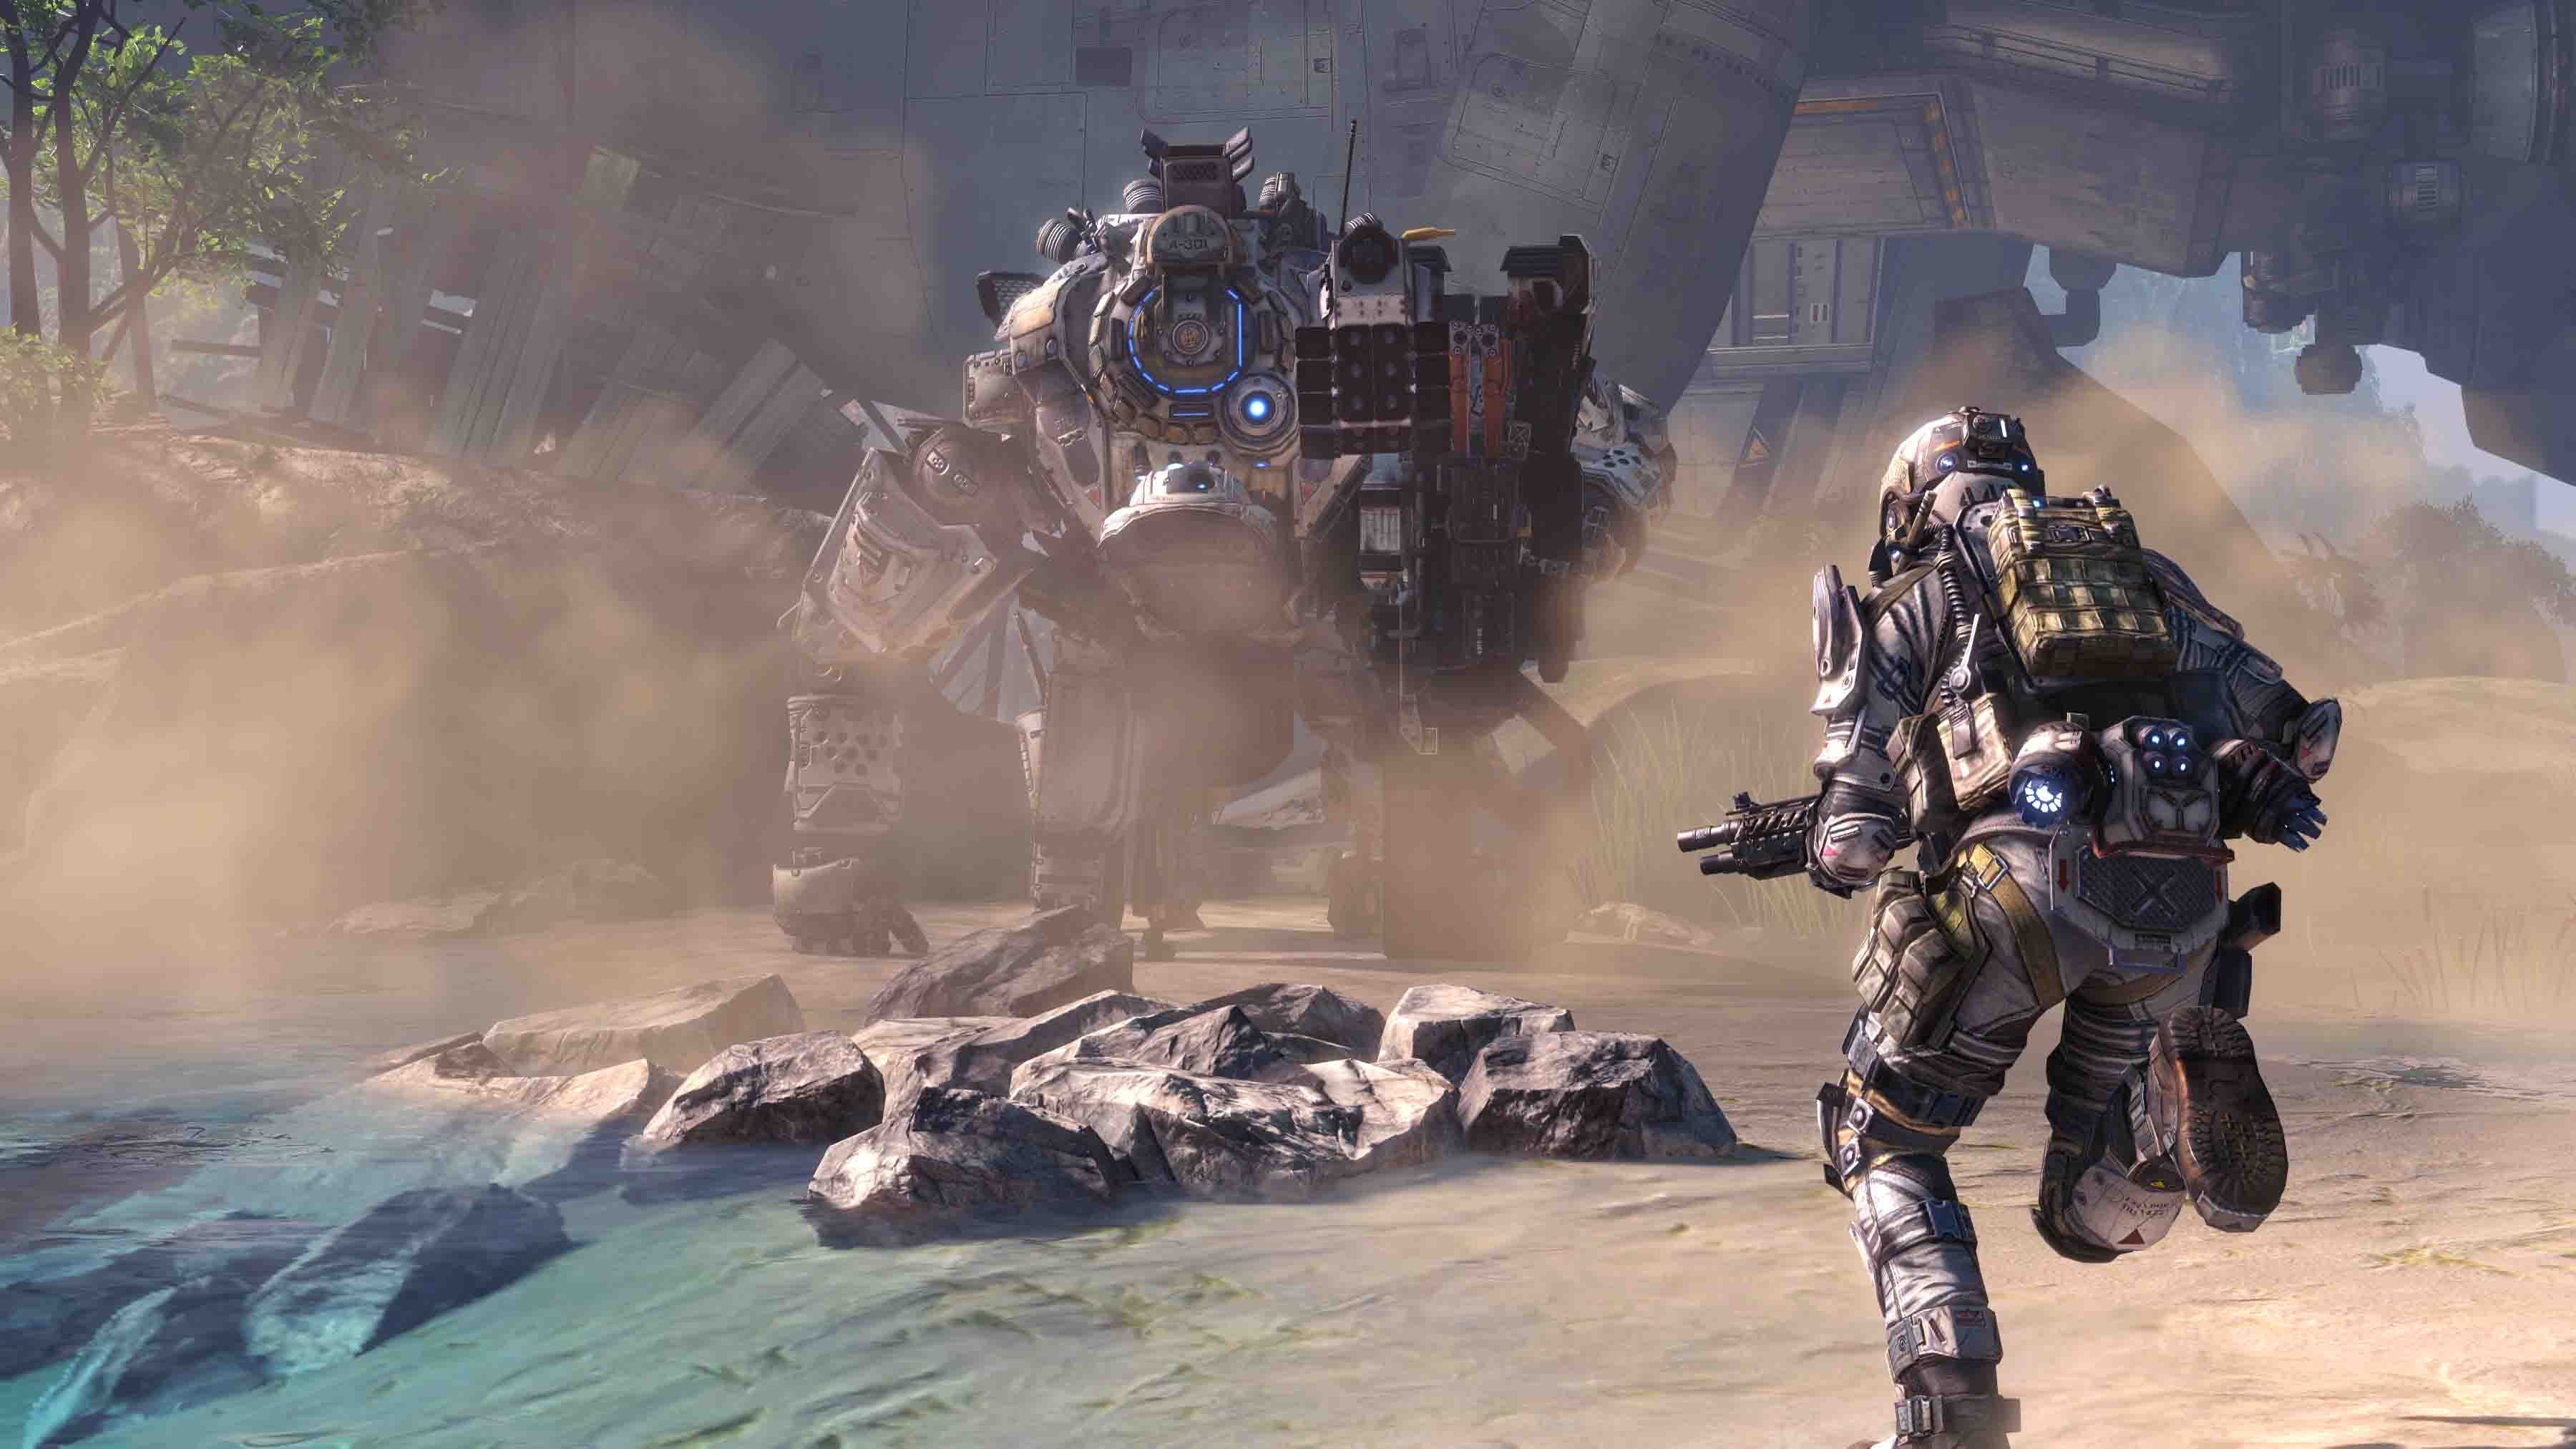 Titanfall 2': New single-player mode, multiplayer revealed at E3 2016 